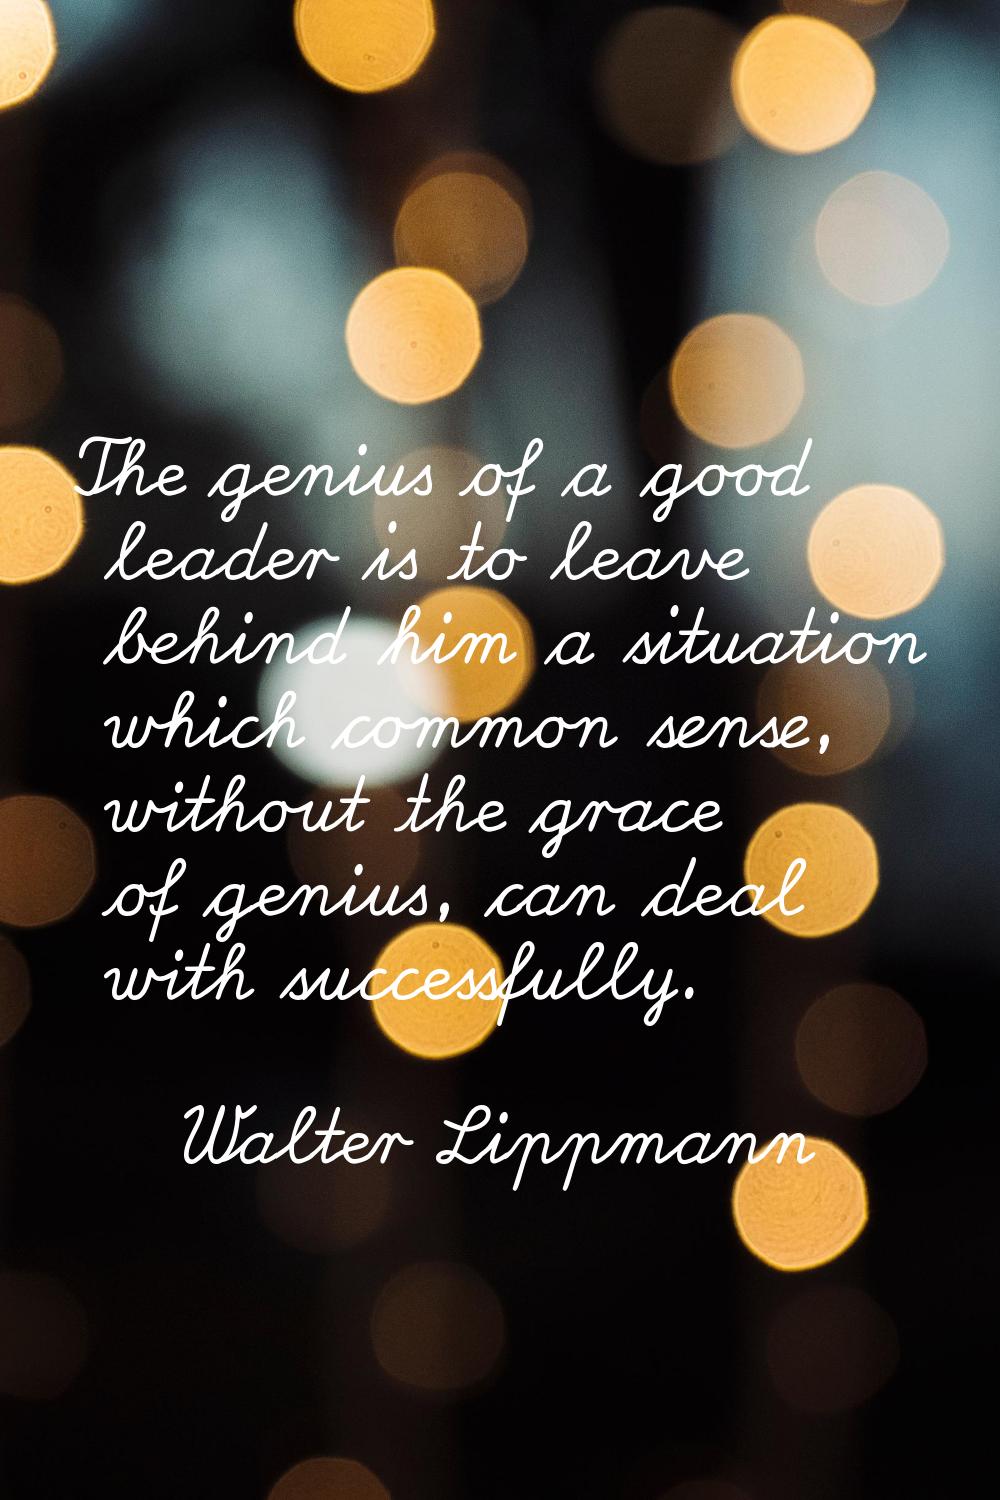 The genius of a good leader is to leave behind him a situation which common sense, without the grac